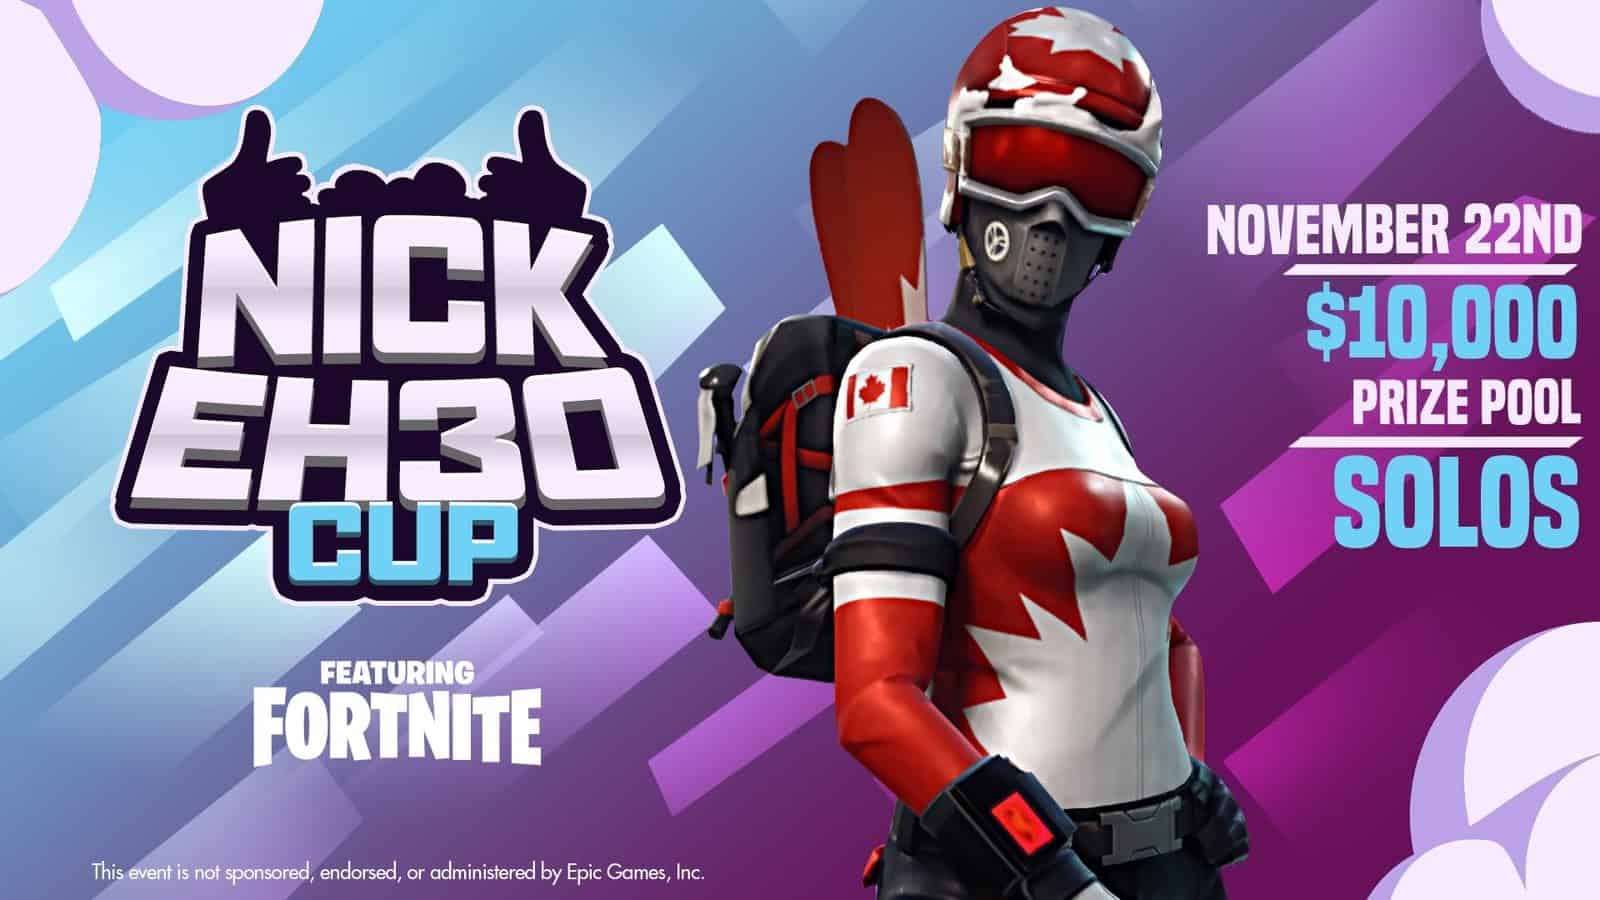 Fortnite: $10,000 Nick Eh 30 Cup Results